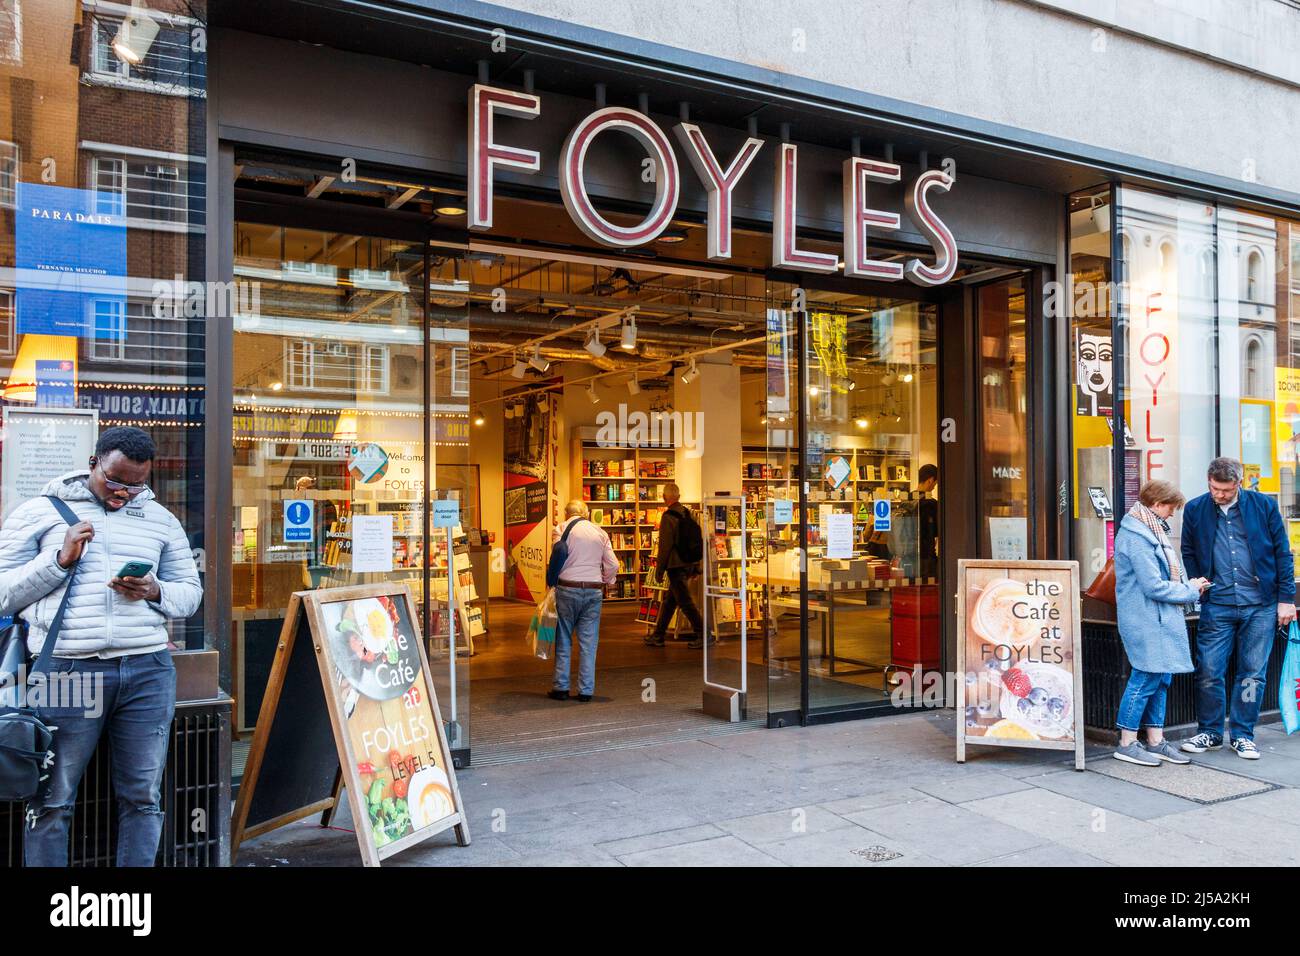 The flagship store of W & G Foyle Ltd. (usually called simply Foyles) a bookseller  in Charing Cross Road, London, UK Stock Photo